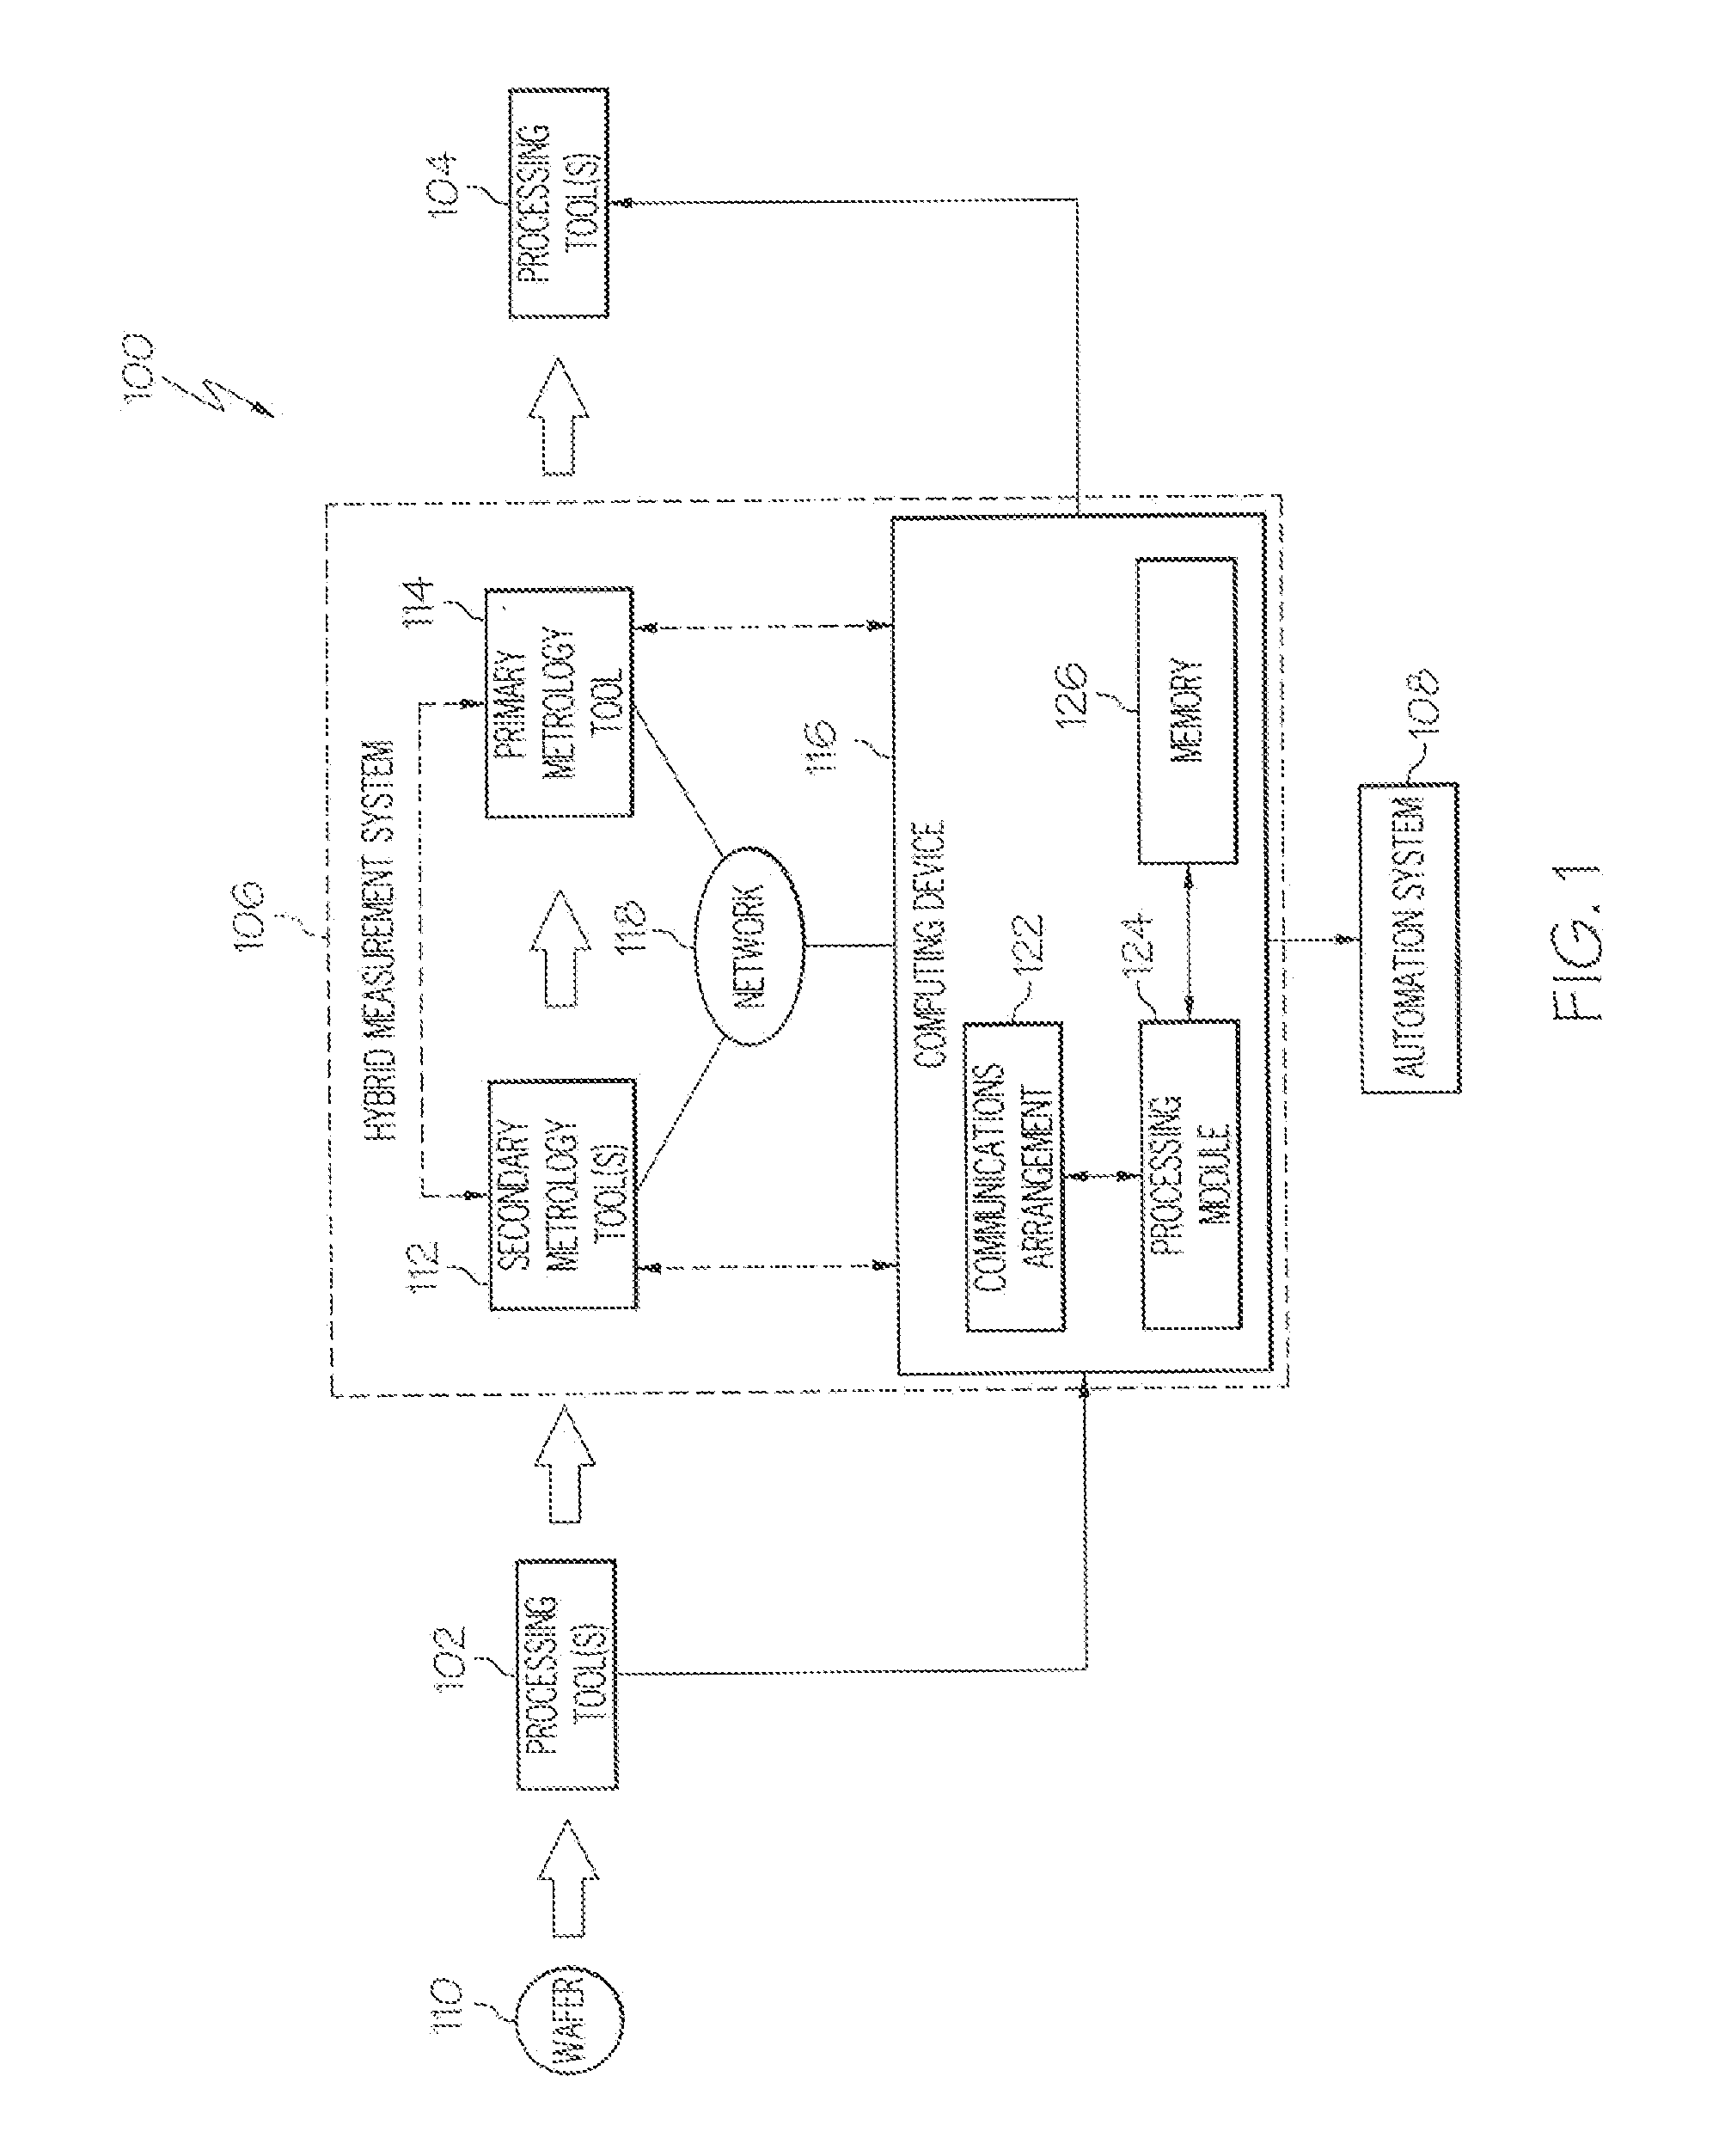 Automated hybrid metrology for semiconductor device fabrication